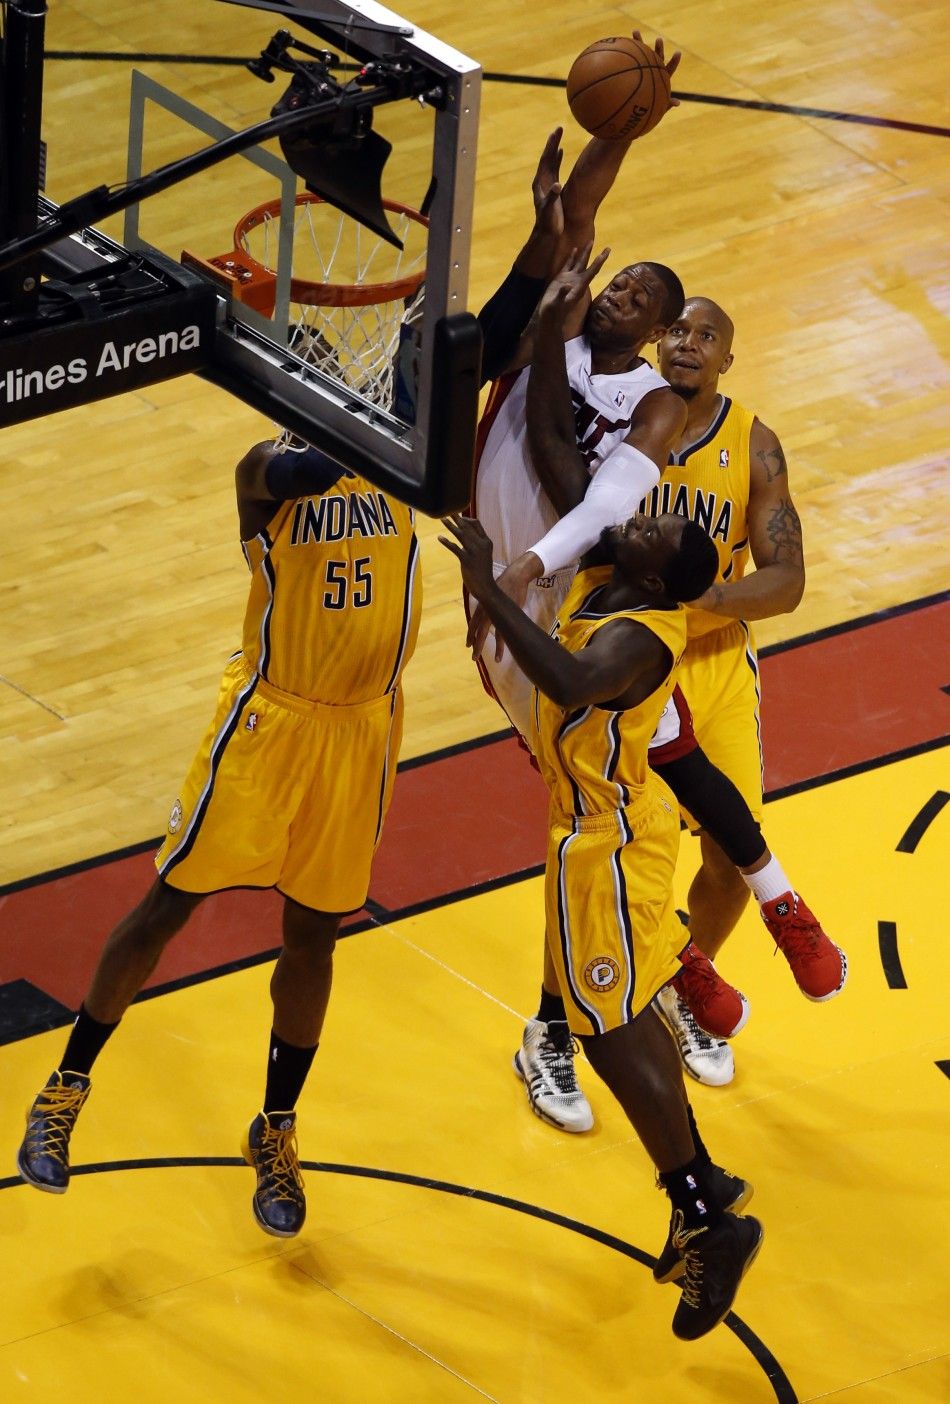 May 24, 2014 Miami, FL, USA Miami Heat guard Dwyane Wade 3 drives to the basket against Indiana Pacers center Roy Hibbert 55 , guard Lance Stephenson 1 and forward David West 21 in game three of the Eastern Conference Finals of the 2014 NBA Play